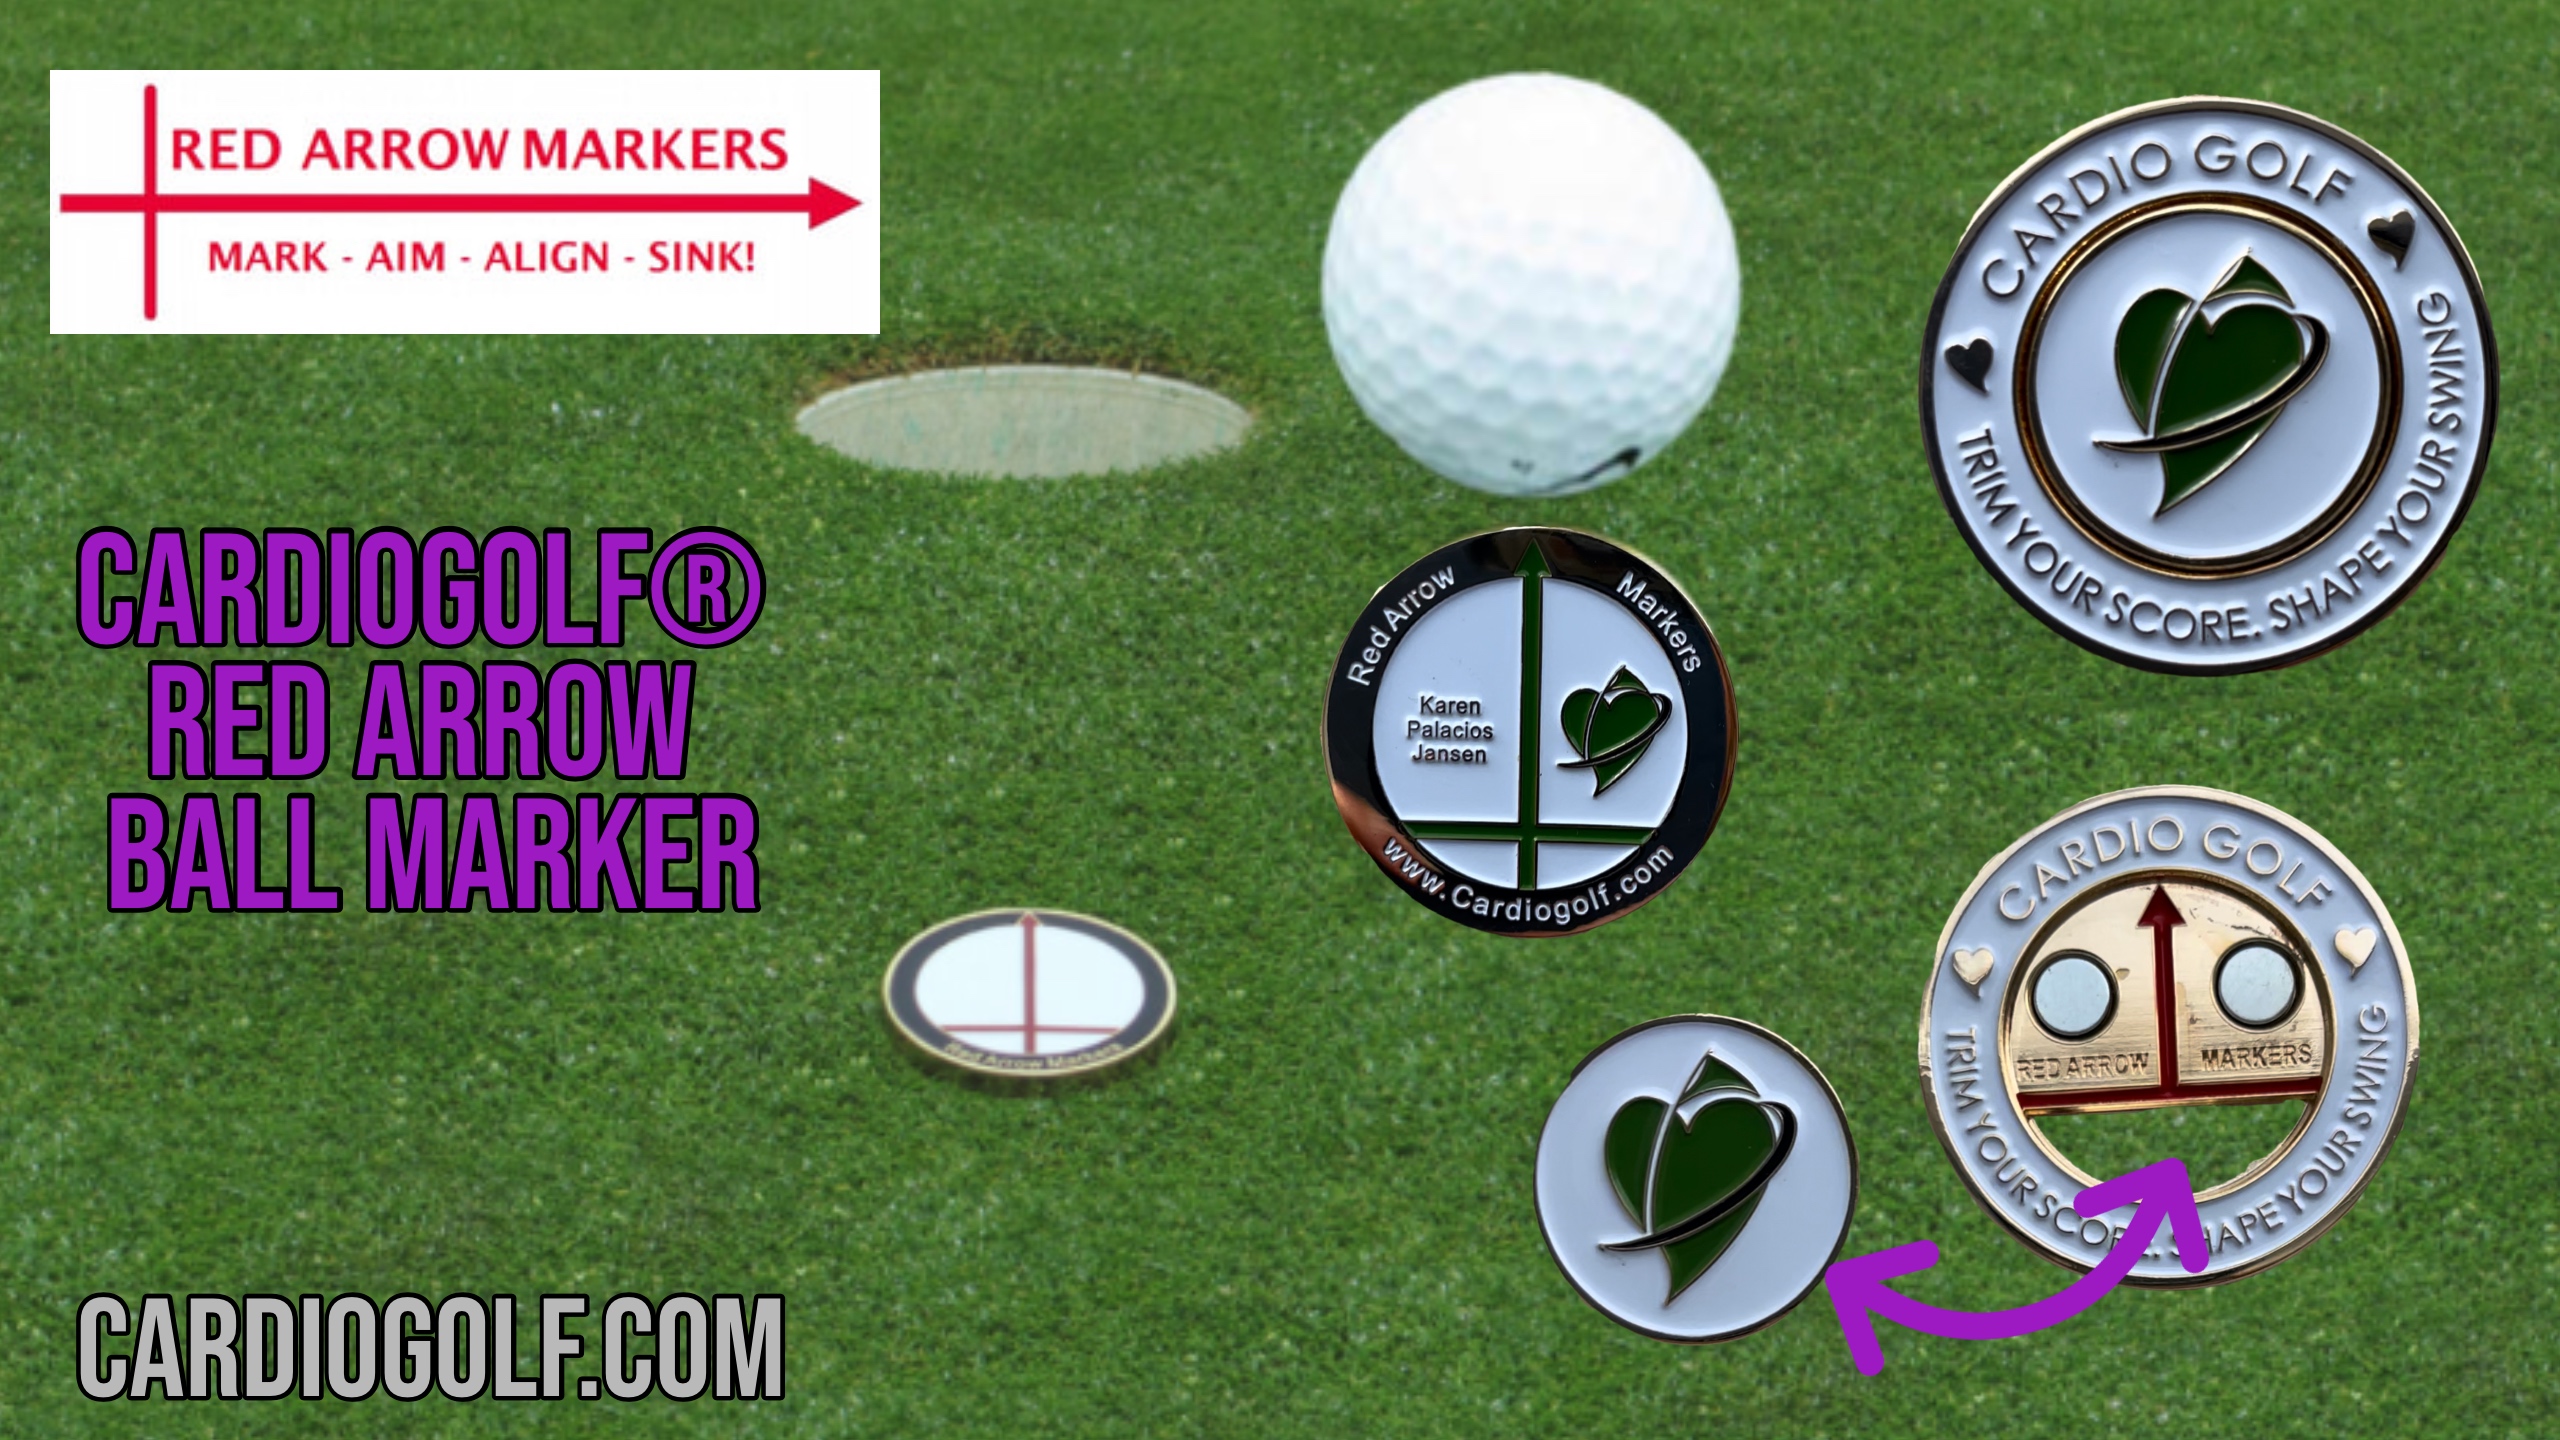 The CardioGolf RED ARROW ALIGNMENT BALL MARKERS TO HOLE MORE PUTTS!